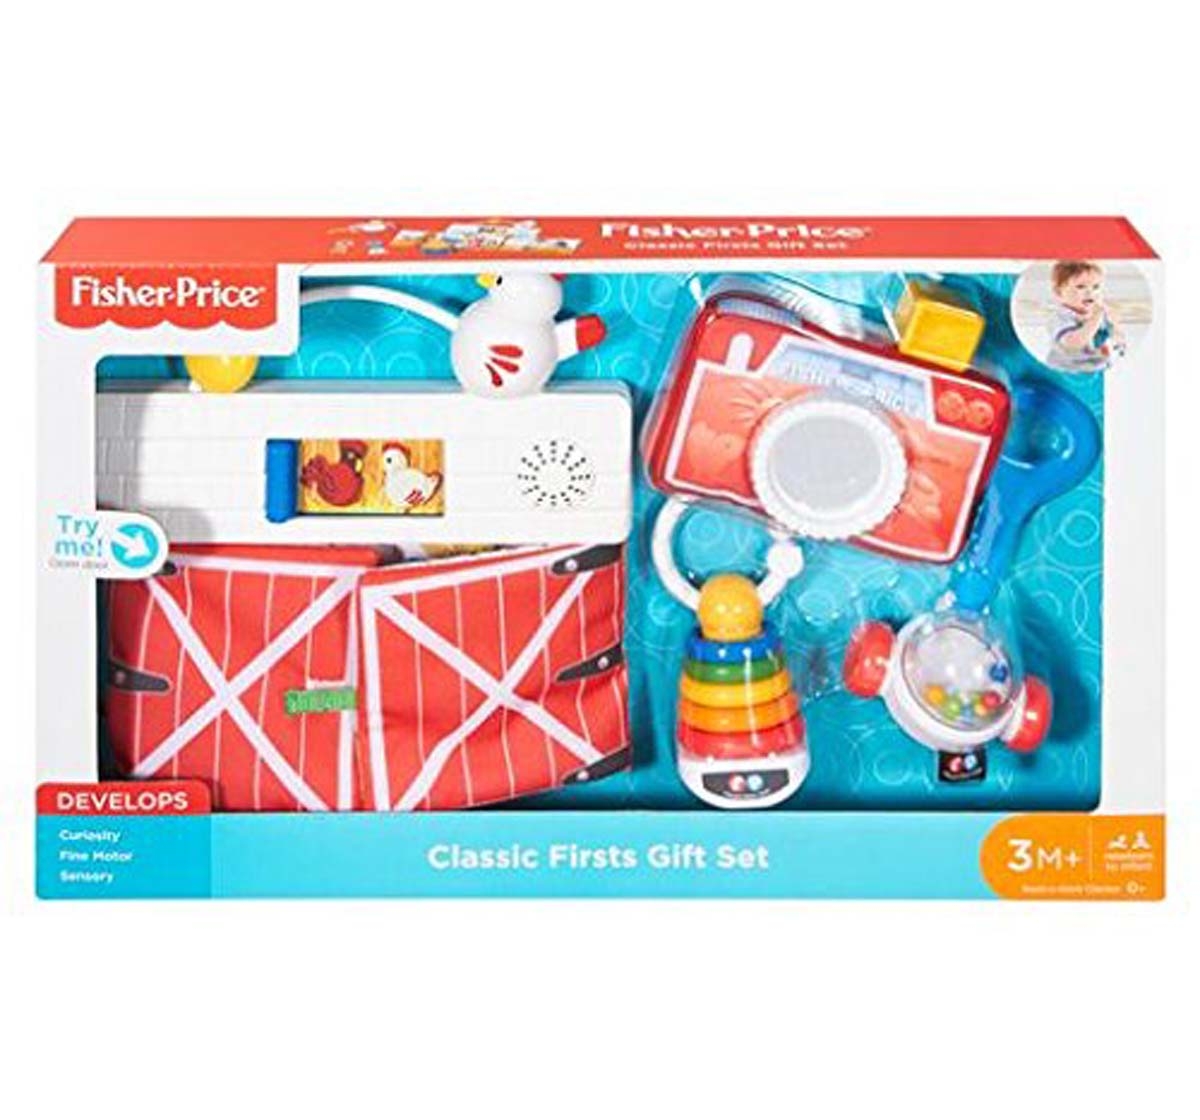 Fisher-Price | Fisher Price Mini Favorites Gift Set Learning Toys for Kids age 3M+ 